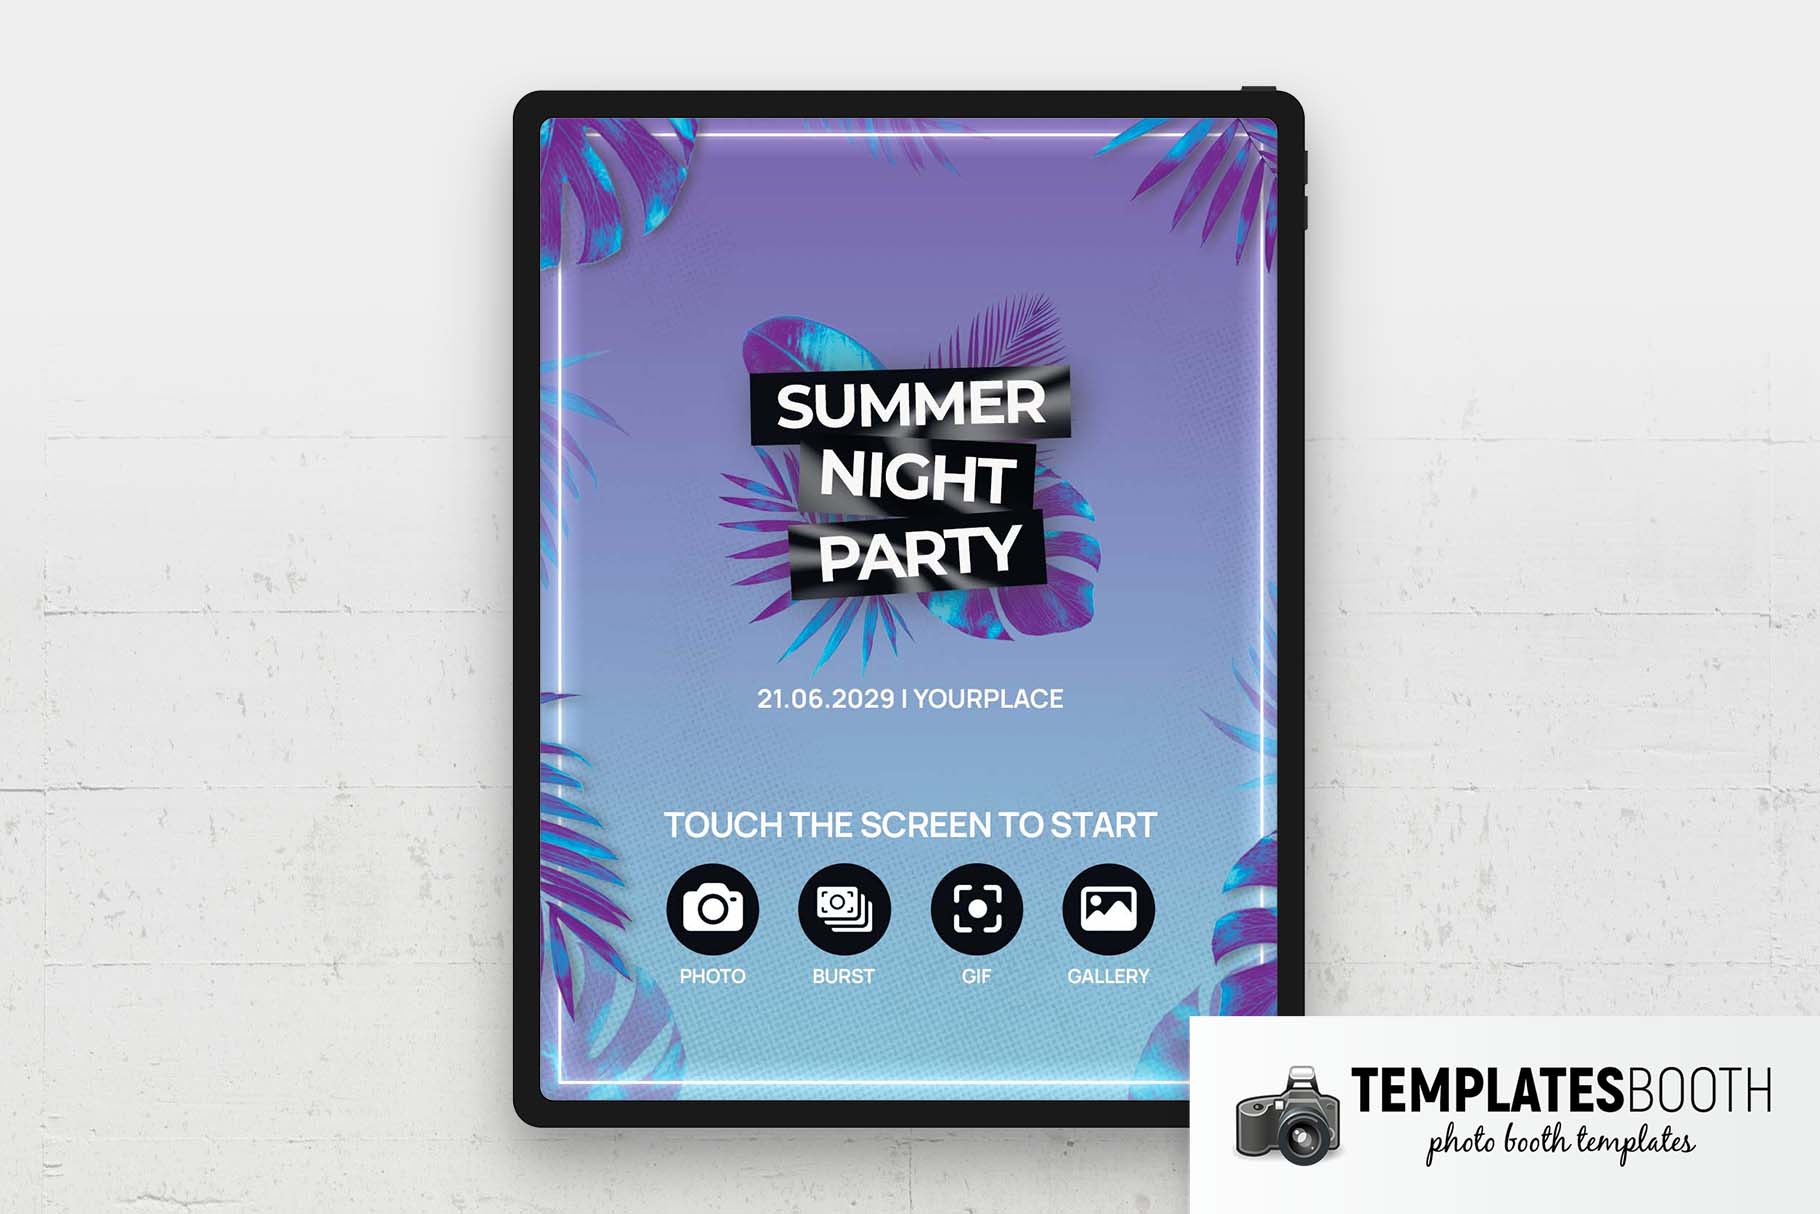 Summer Nightclub Party Photo Booth Welcome Screen